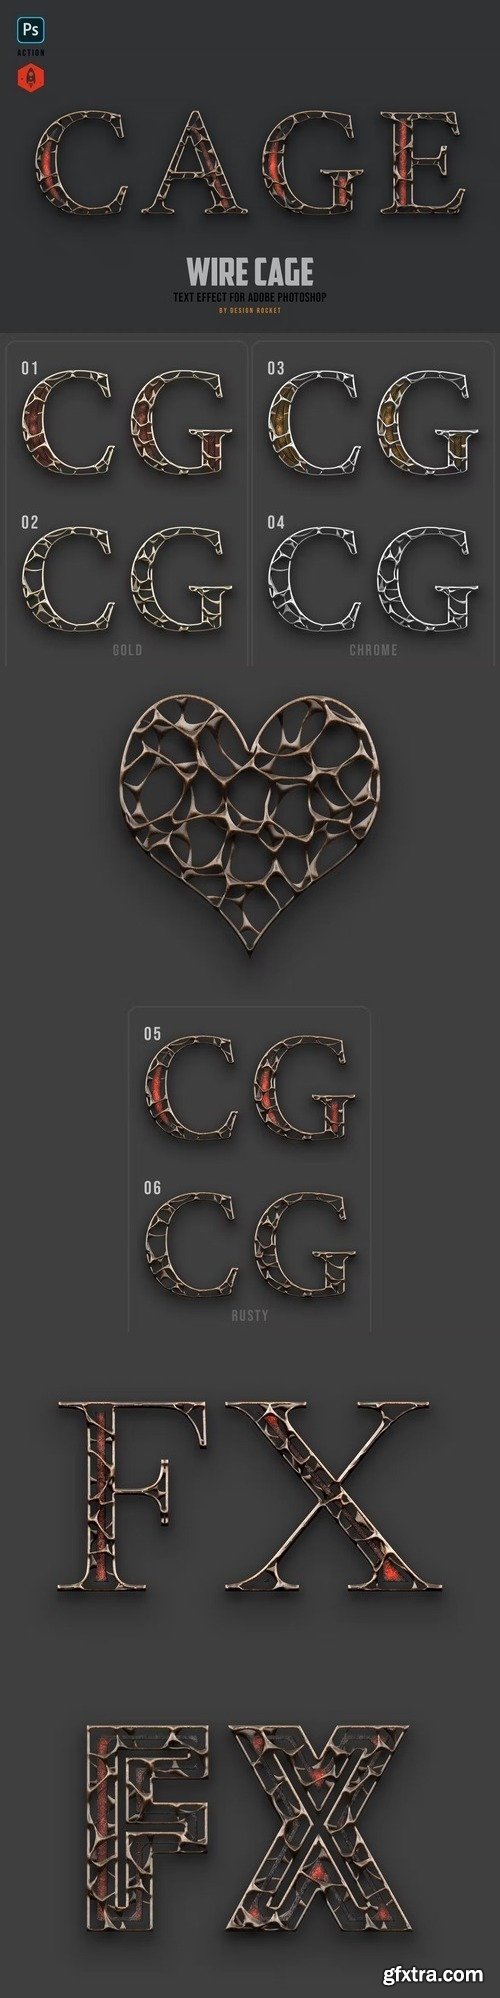 Wire Cage Text Effect for Photoshop